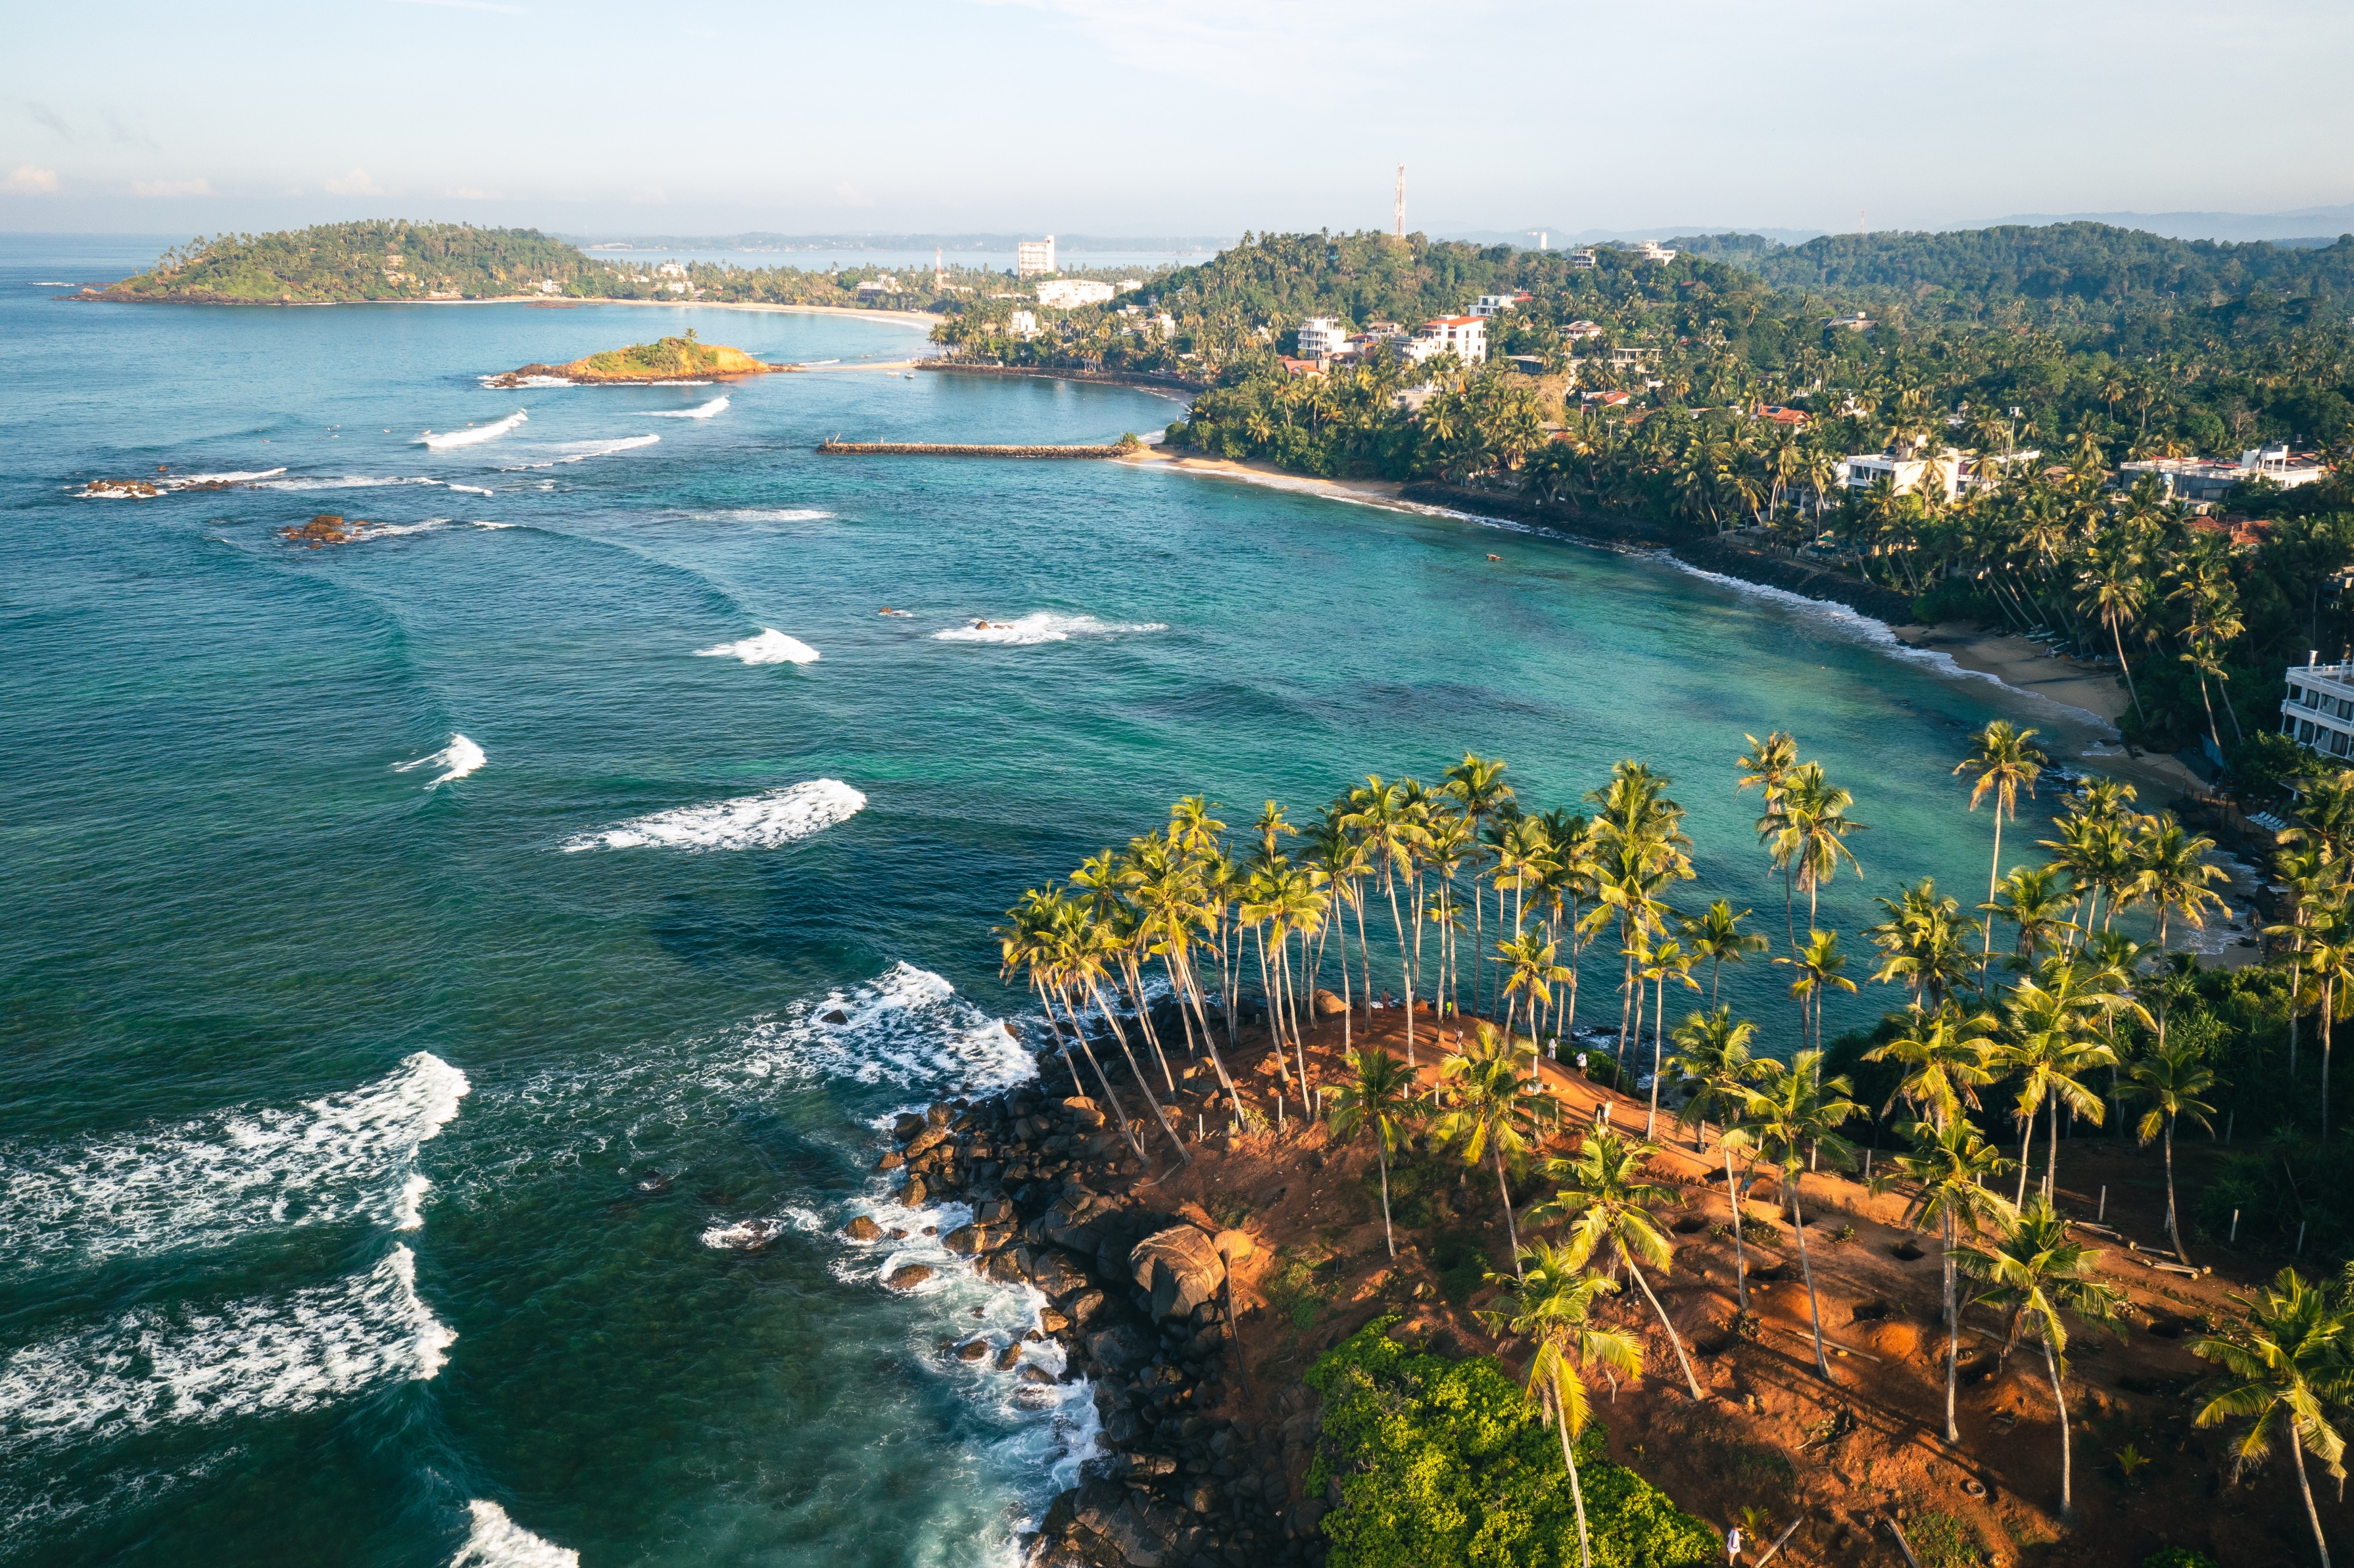 Sri Lanka is known for its lovely beaches. Photo: Shutterstock